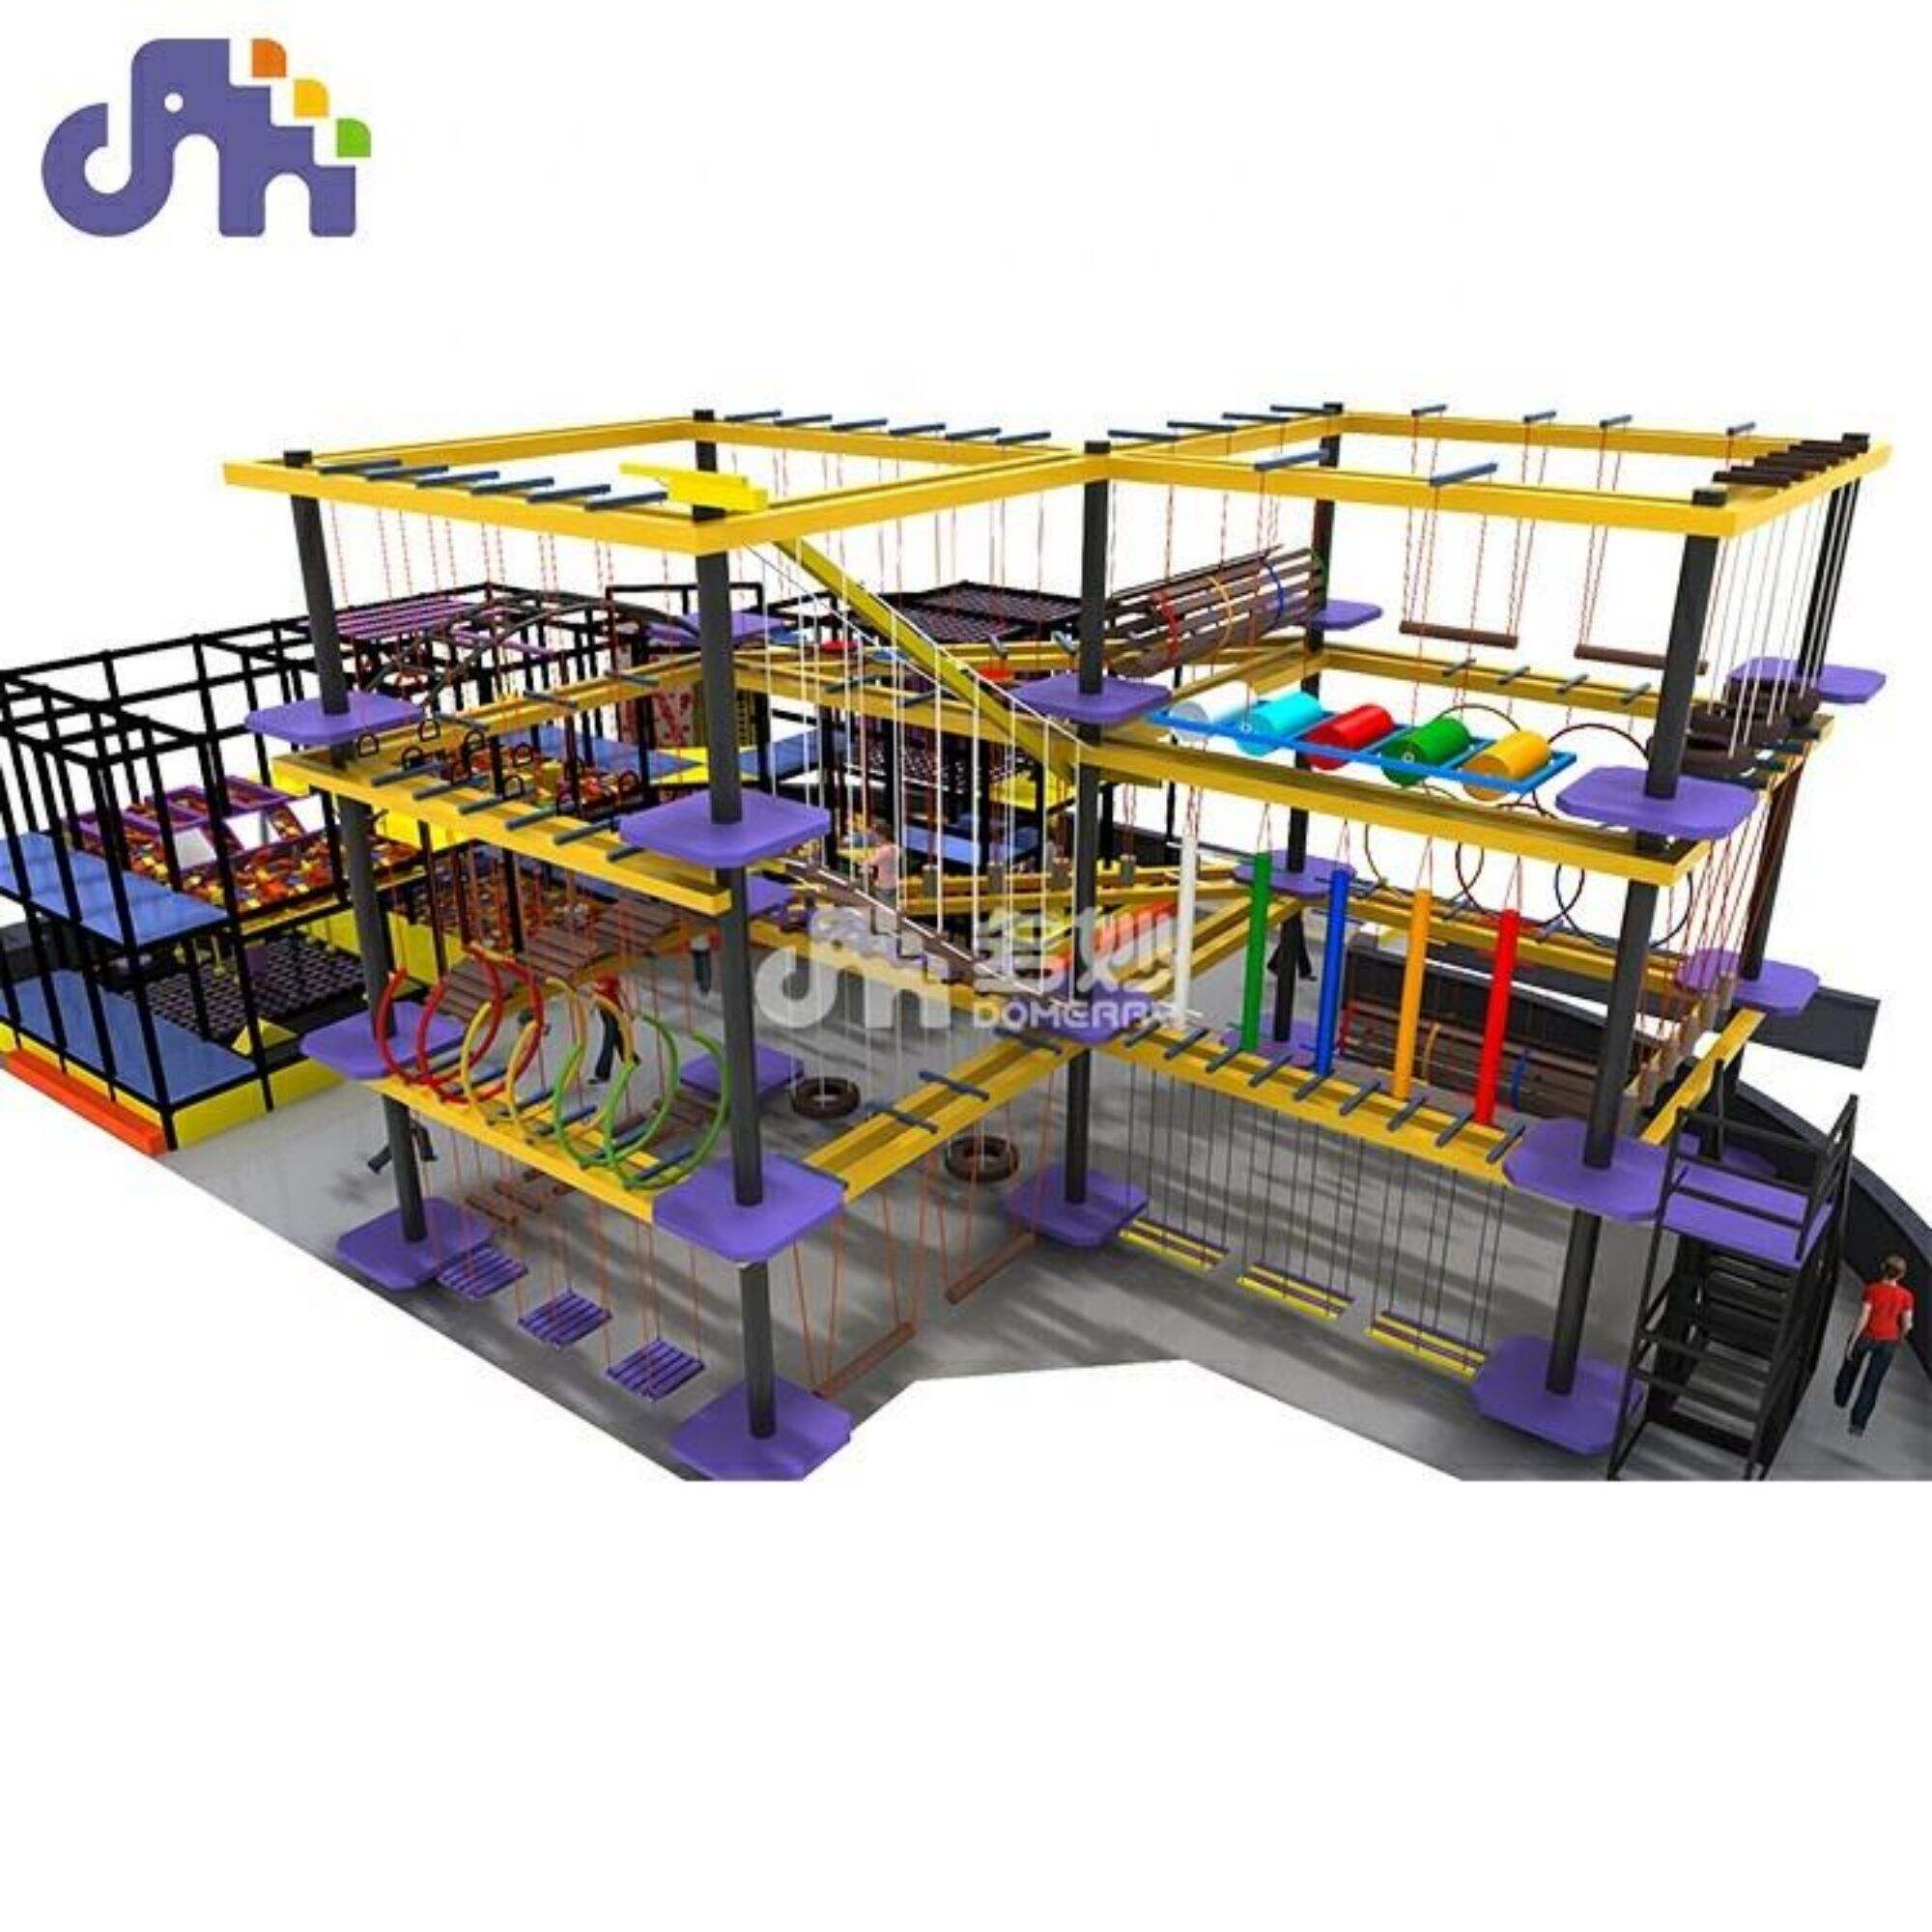 Domerry amusement new high rope course indoor playground equipment theme adventure park